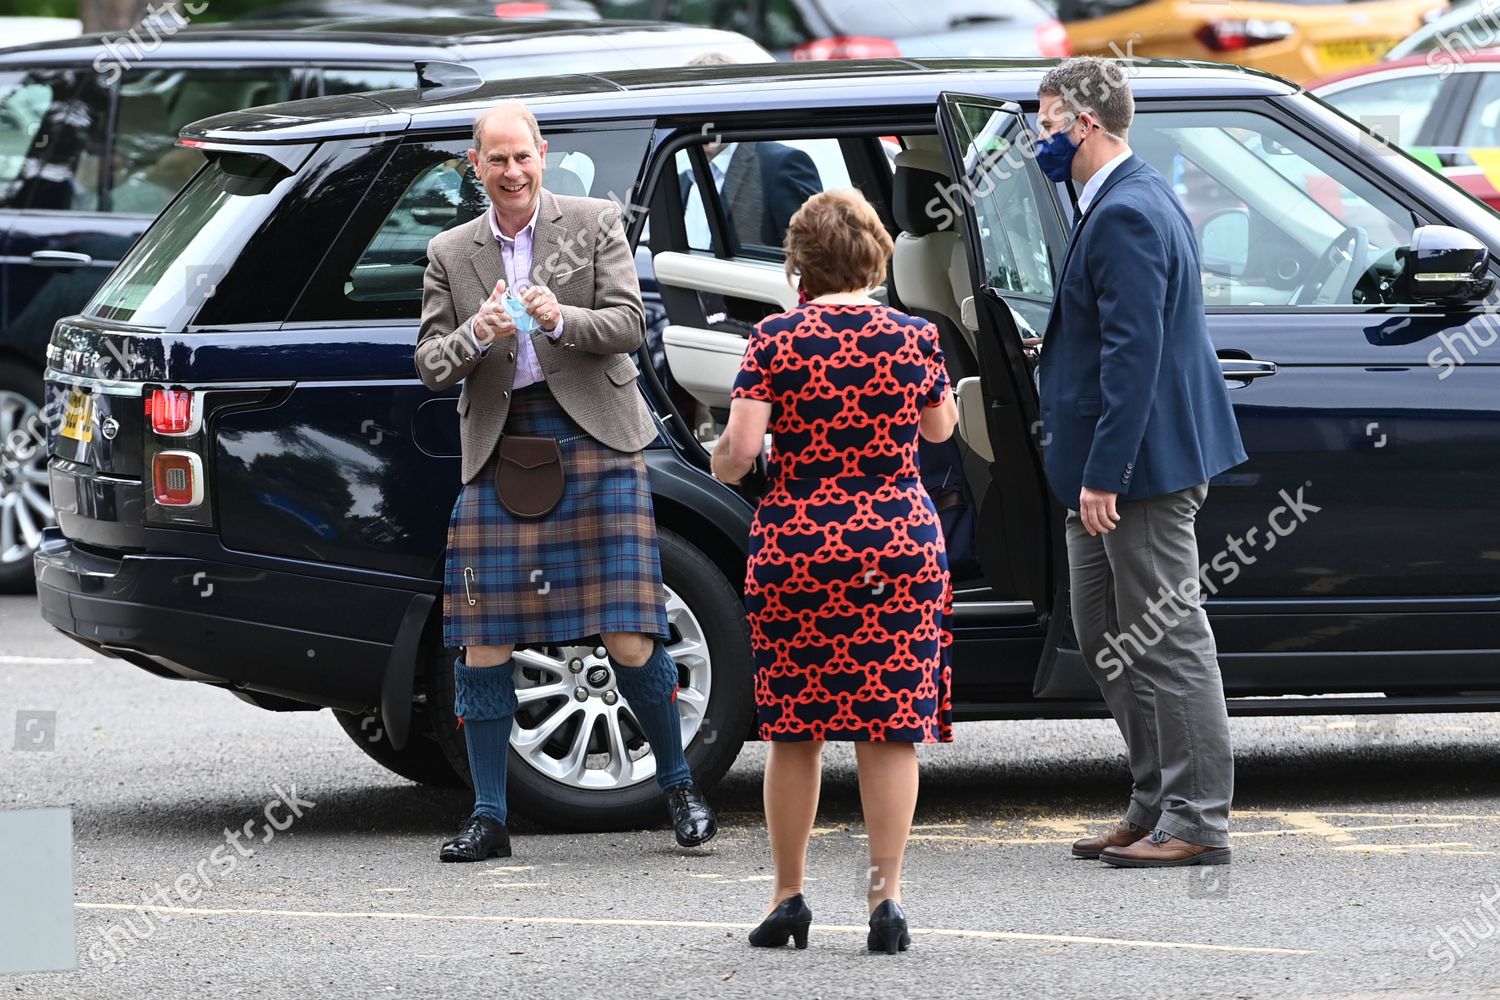 CASA REAL BRITÁNICA - Página 76 Prince-edward-and-sophie-countess-of-wessex-visit-to-forfar-golf-club-scotland-uk-shutterstock-editorial-12172307a